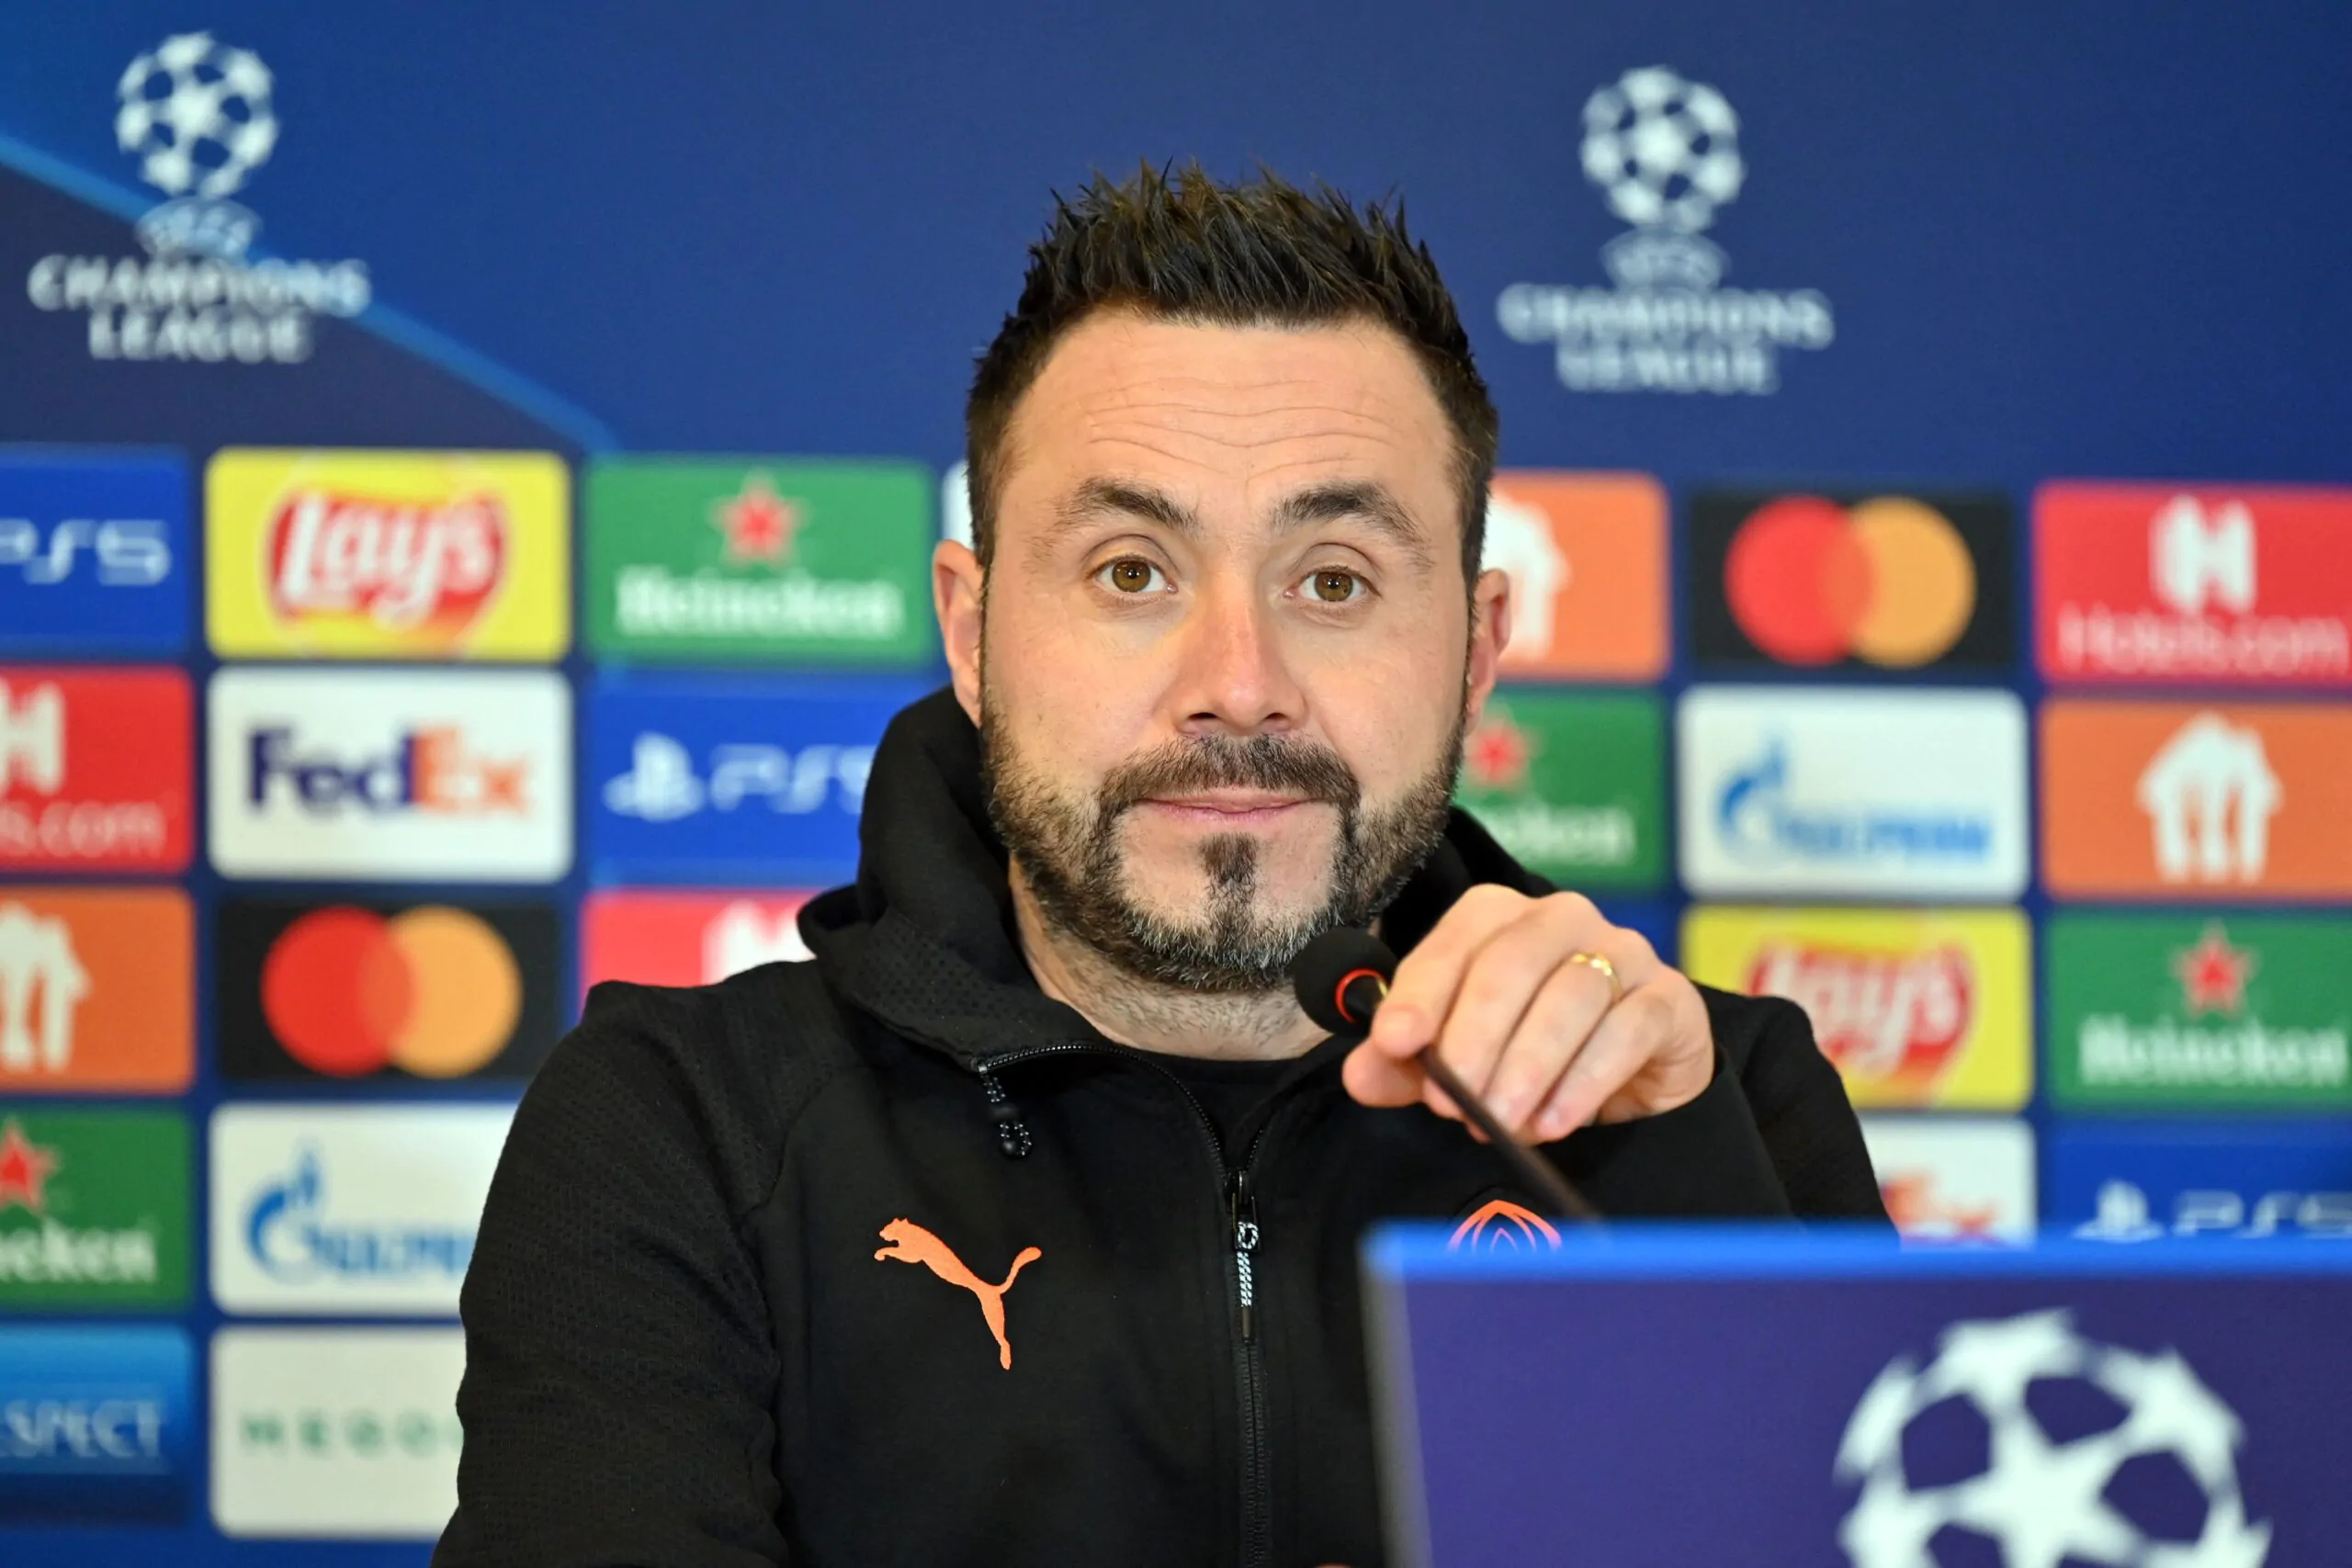 Roberto De Zerbi struck a deal with Brighton, becoming the second Italian coach currently in the Premier League alongside Antonio Conte.